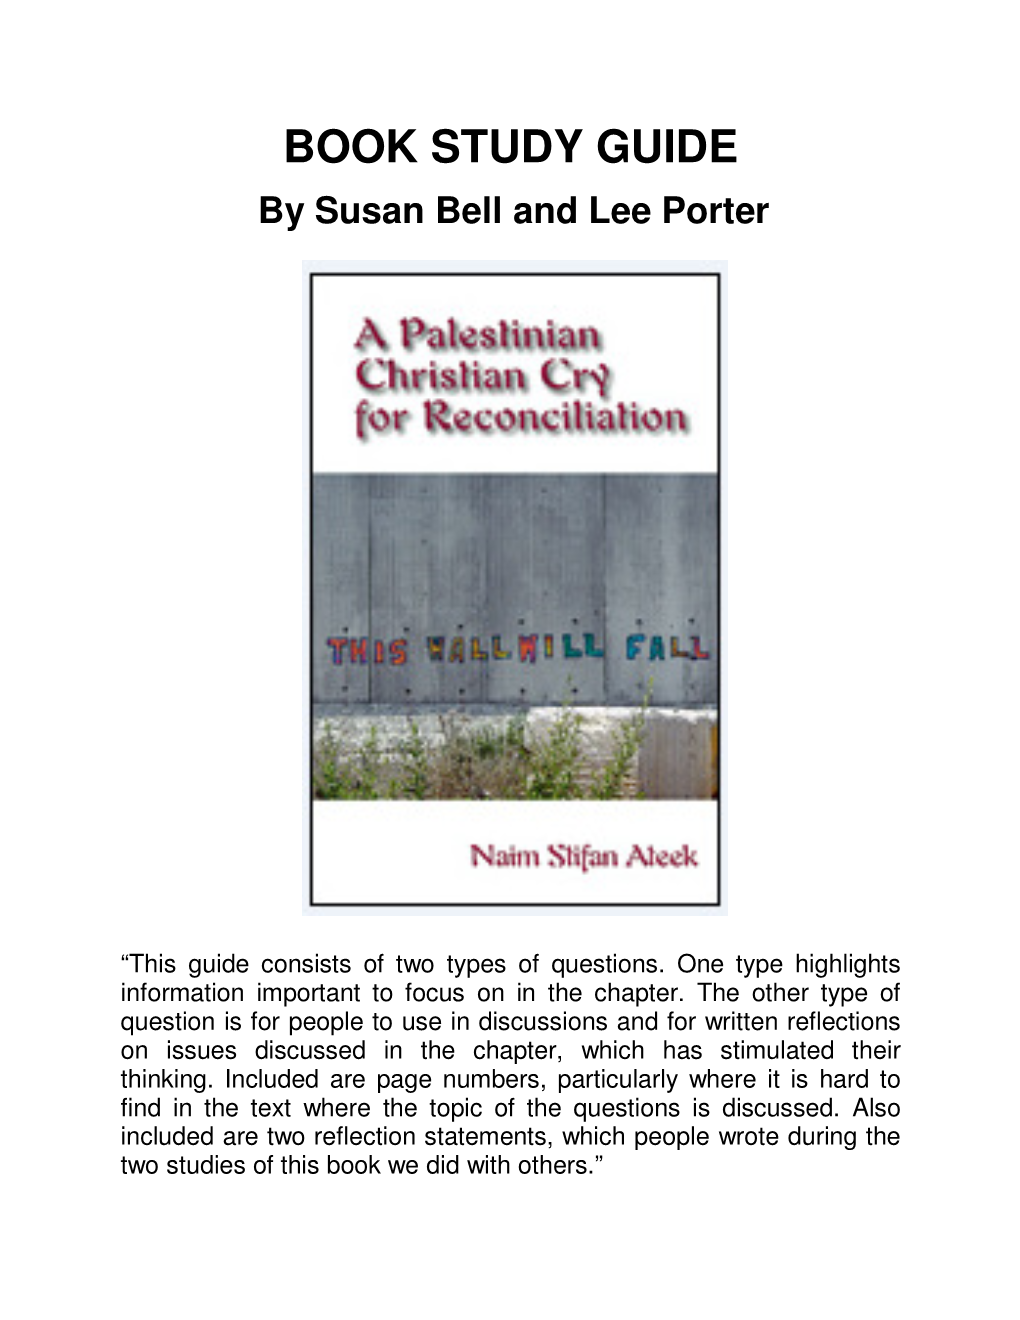 PDF Study Guide to a Palestinian Christian Cry for Reconciliation